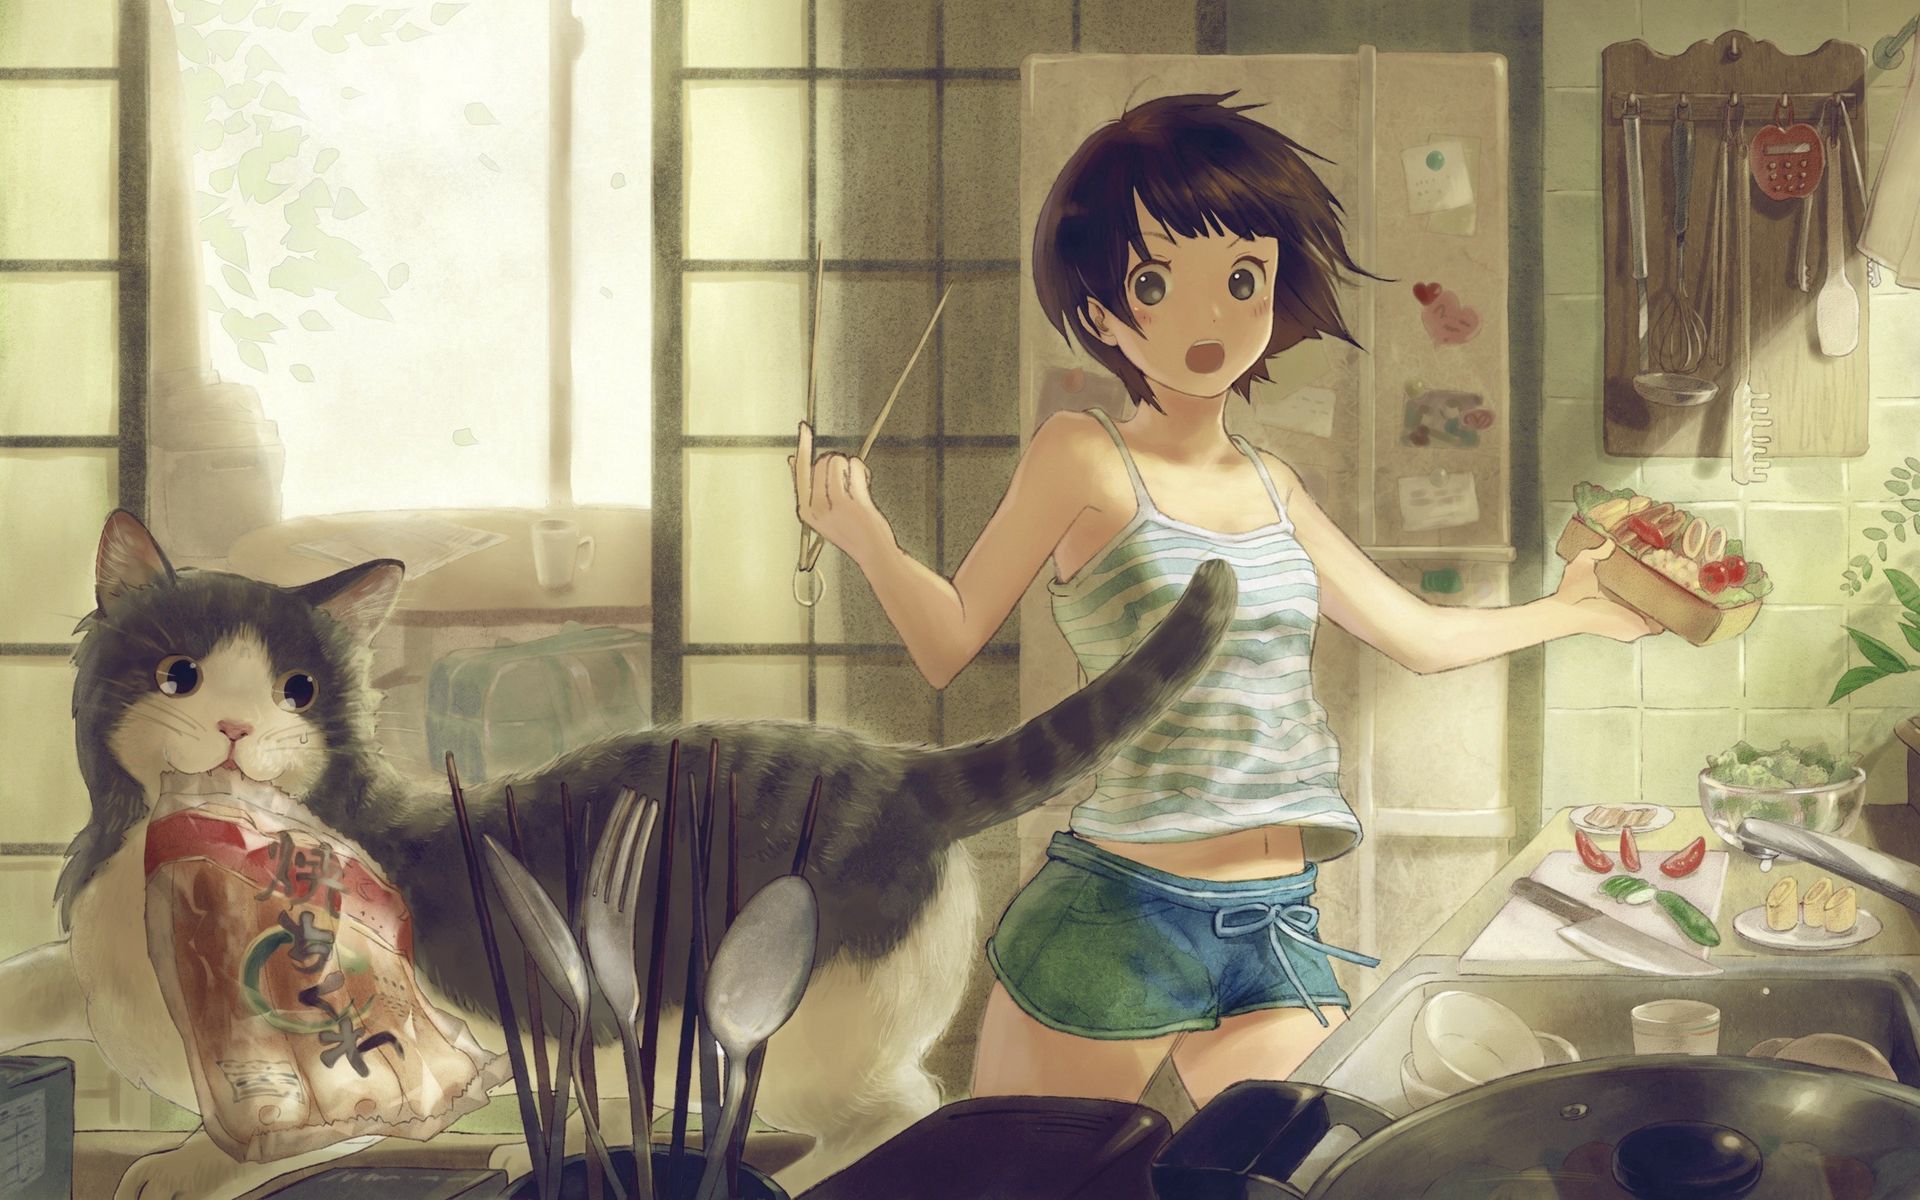 Download wallpaper 1920x1200 anime, girl, cat, room widescreen 16:10 HD background